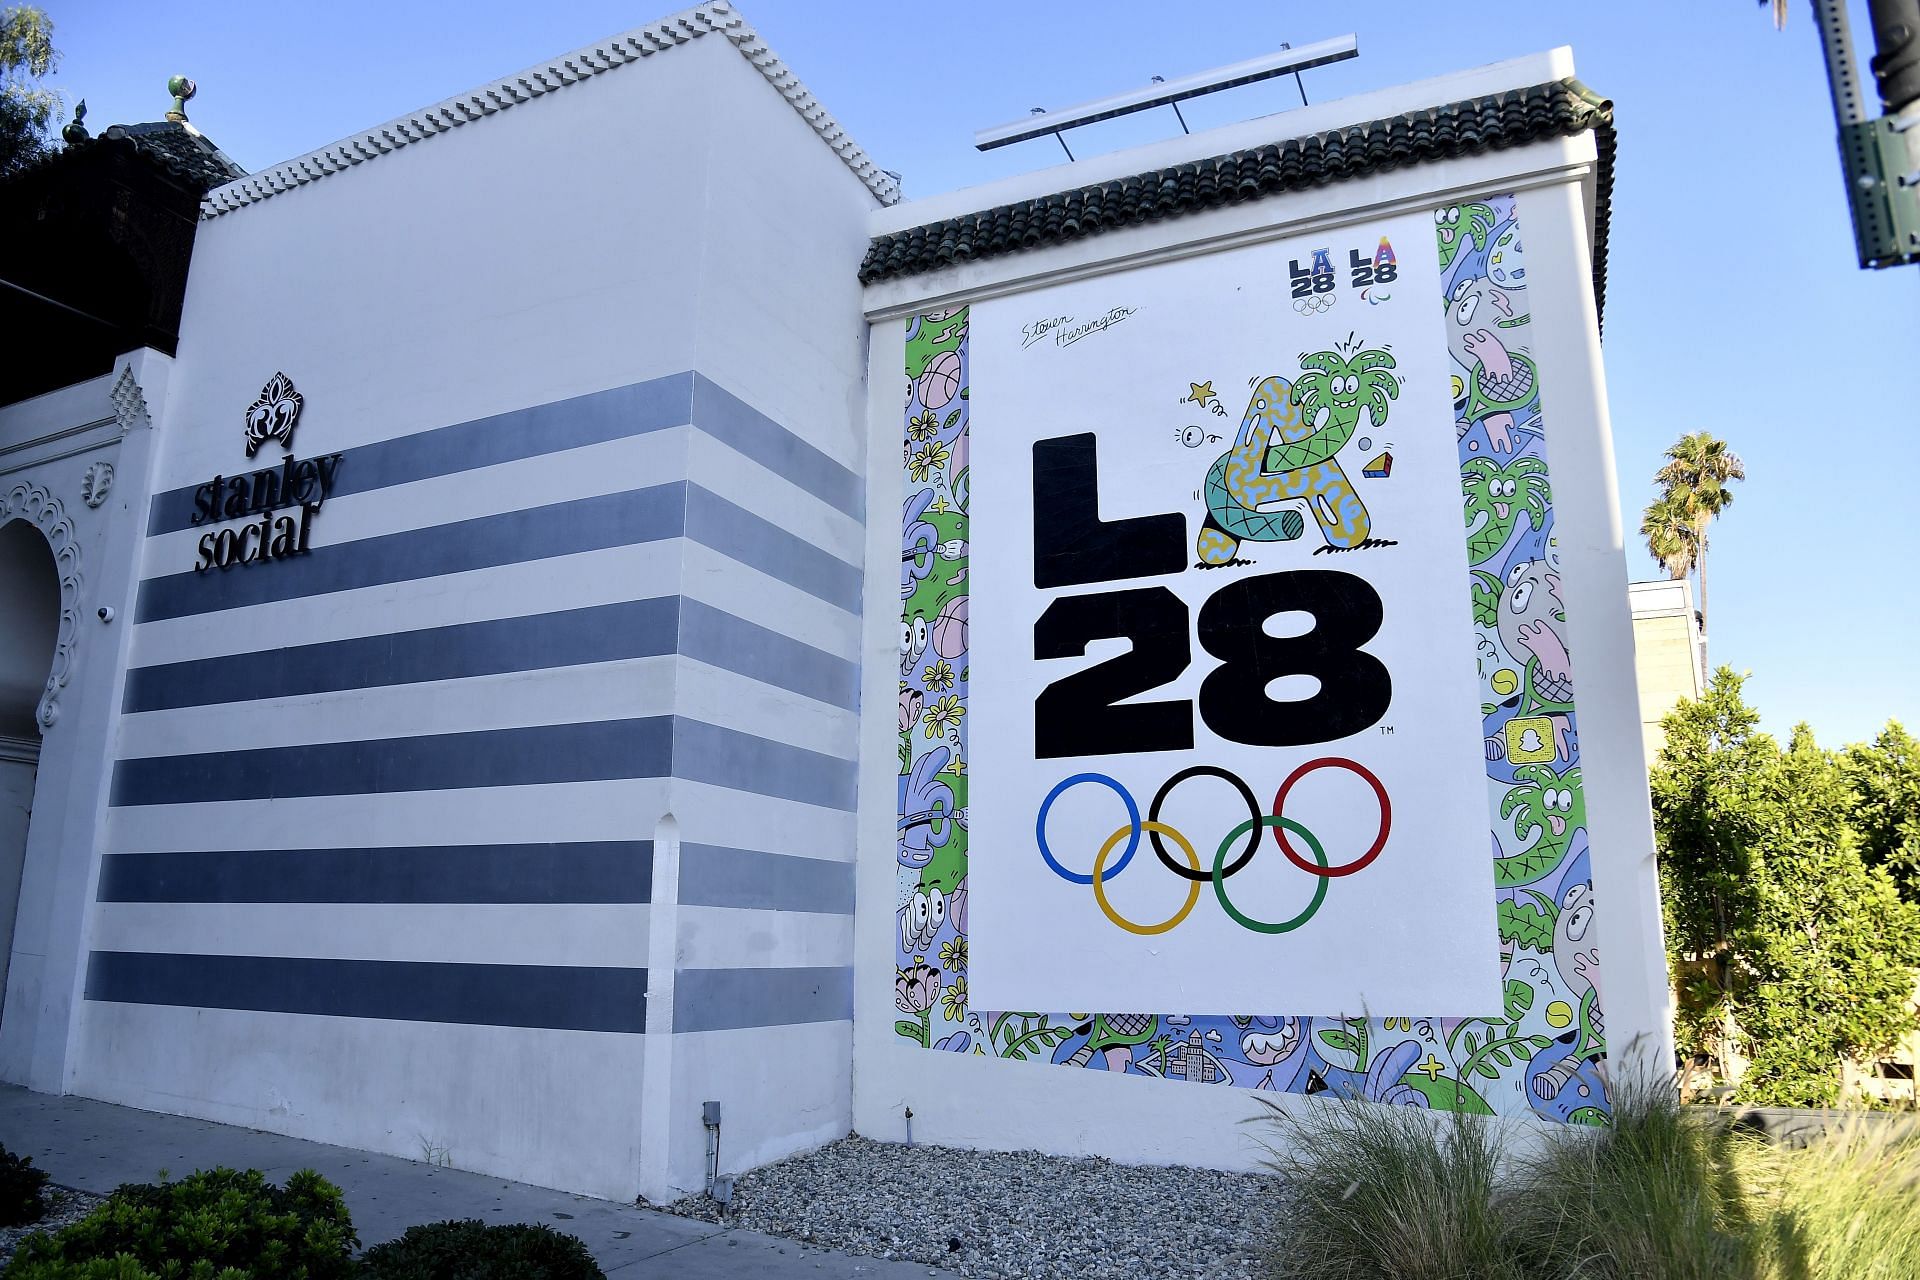 The 2028 Olympics will take place in Los Angeles